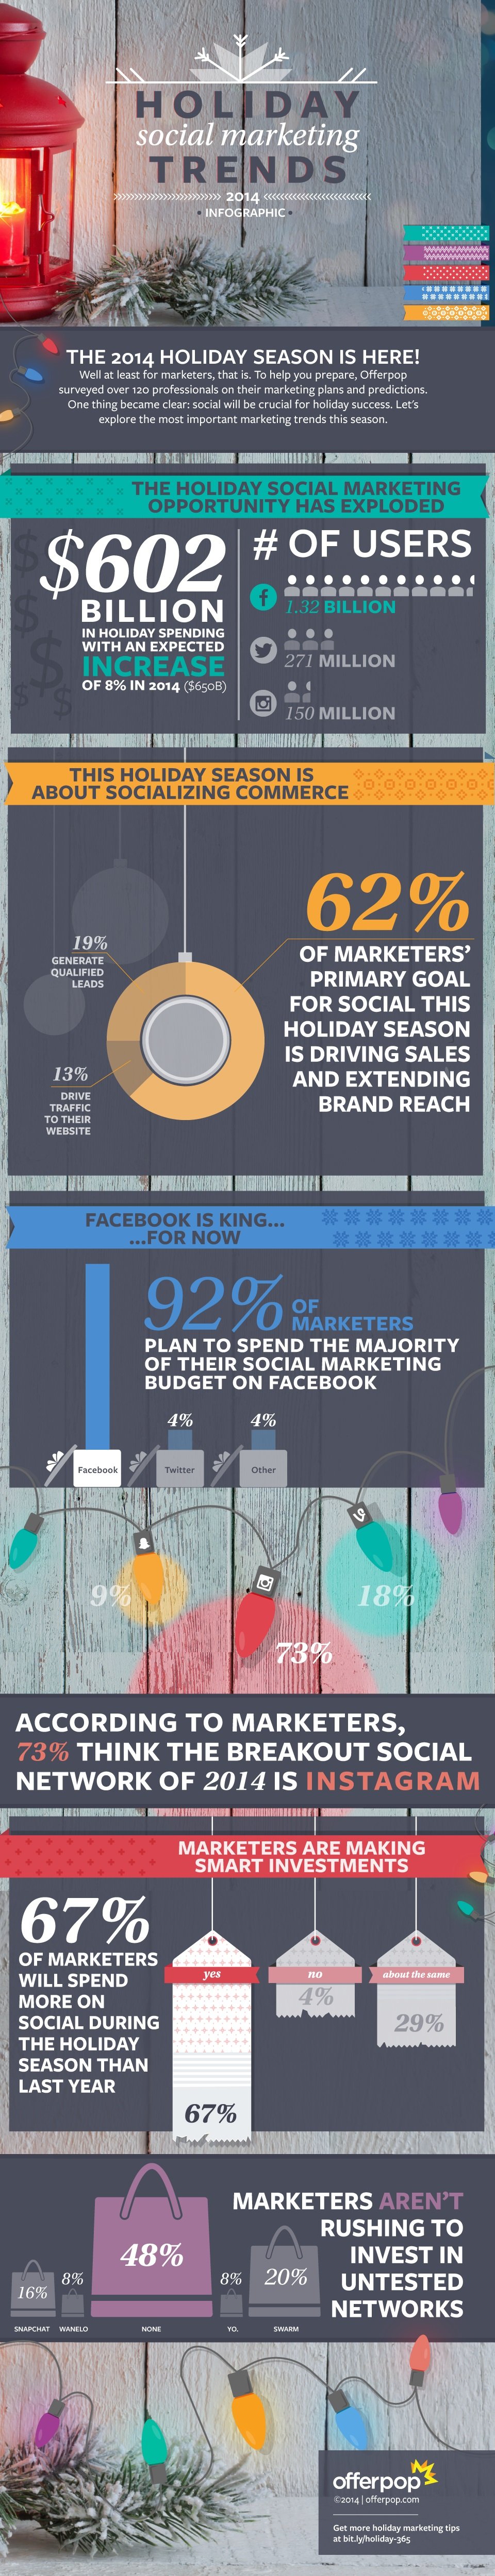 infographic on holiday marketing